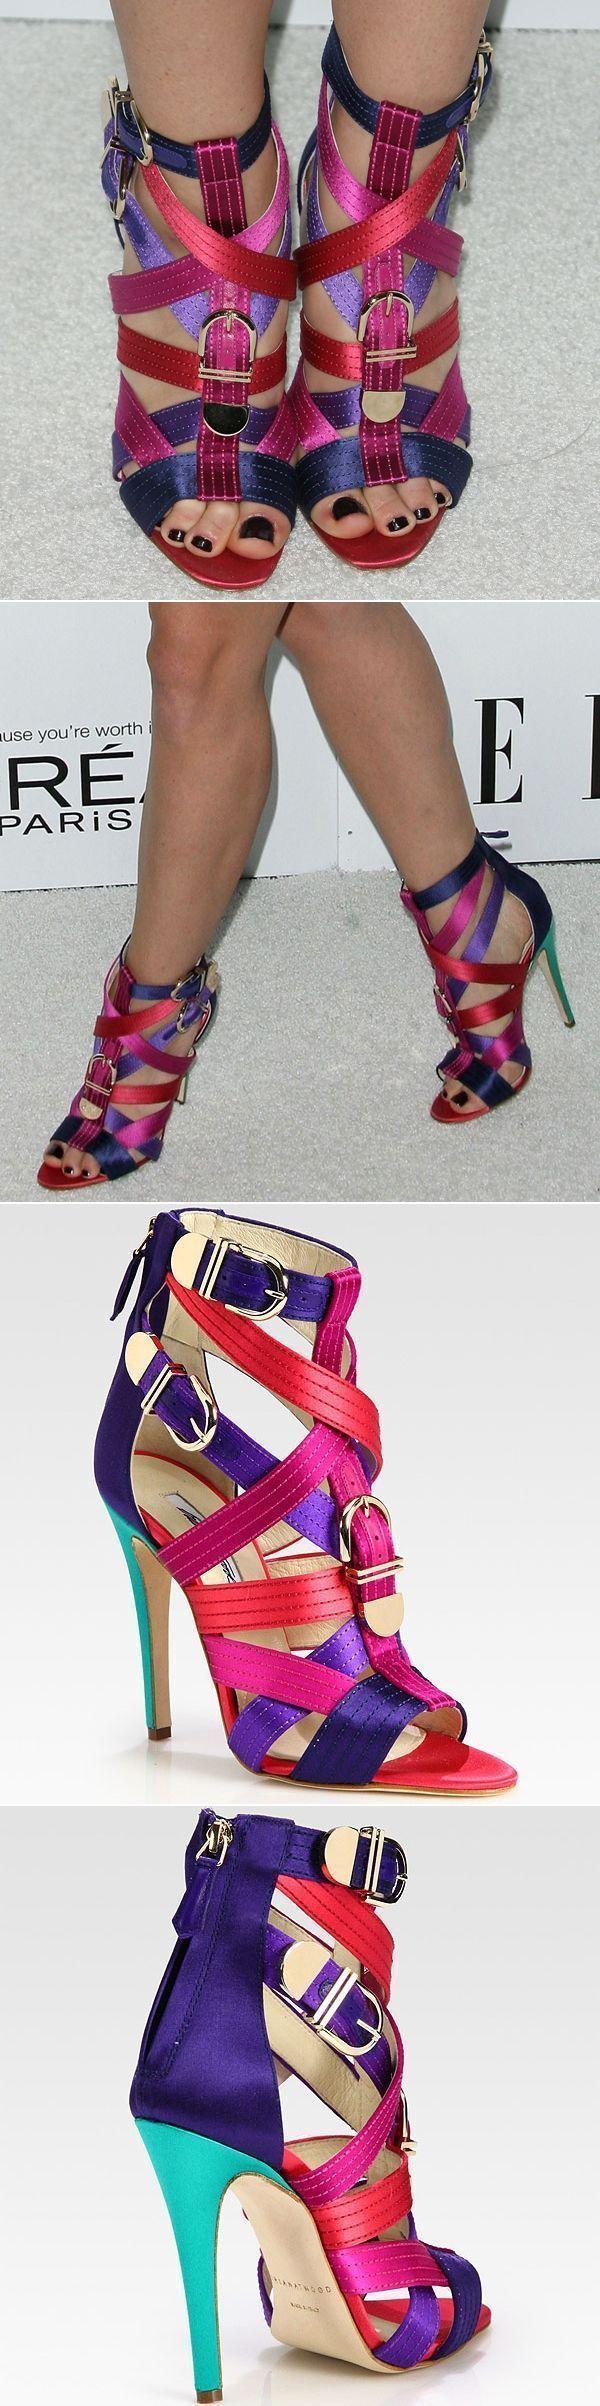 Mariage - Jayma Mays Rocking Brian Atwood ‘Encanta’ Buckled Multicolored Strappy Satin Sandals #brianatwoodheelsstyle #brianatwoodheelsstrappysandals 